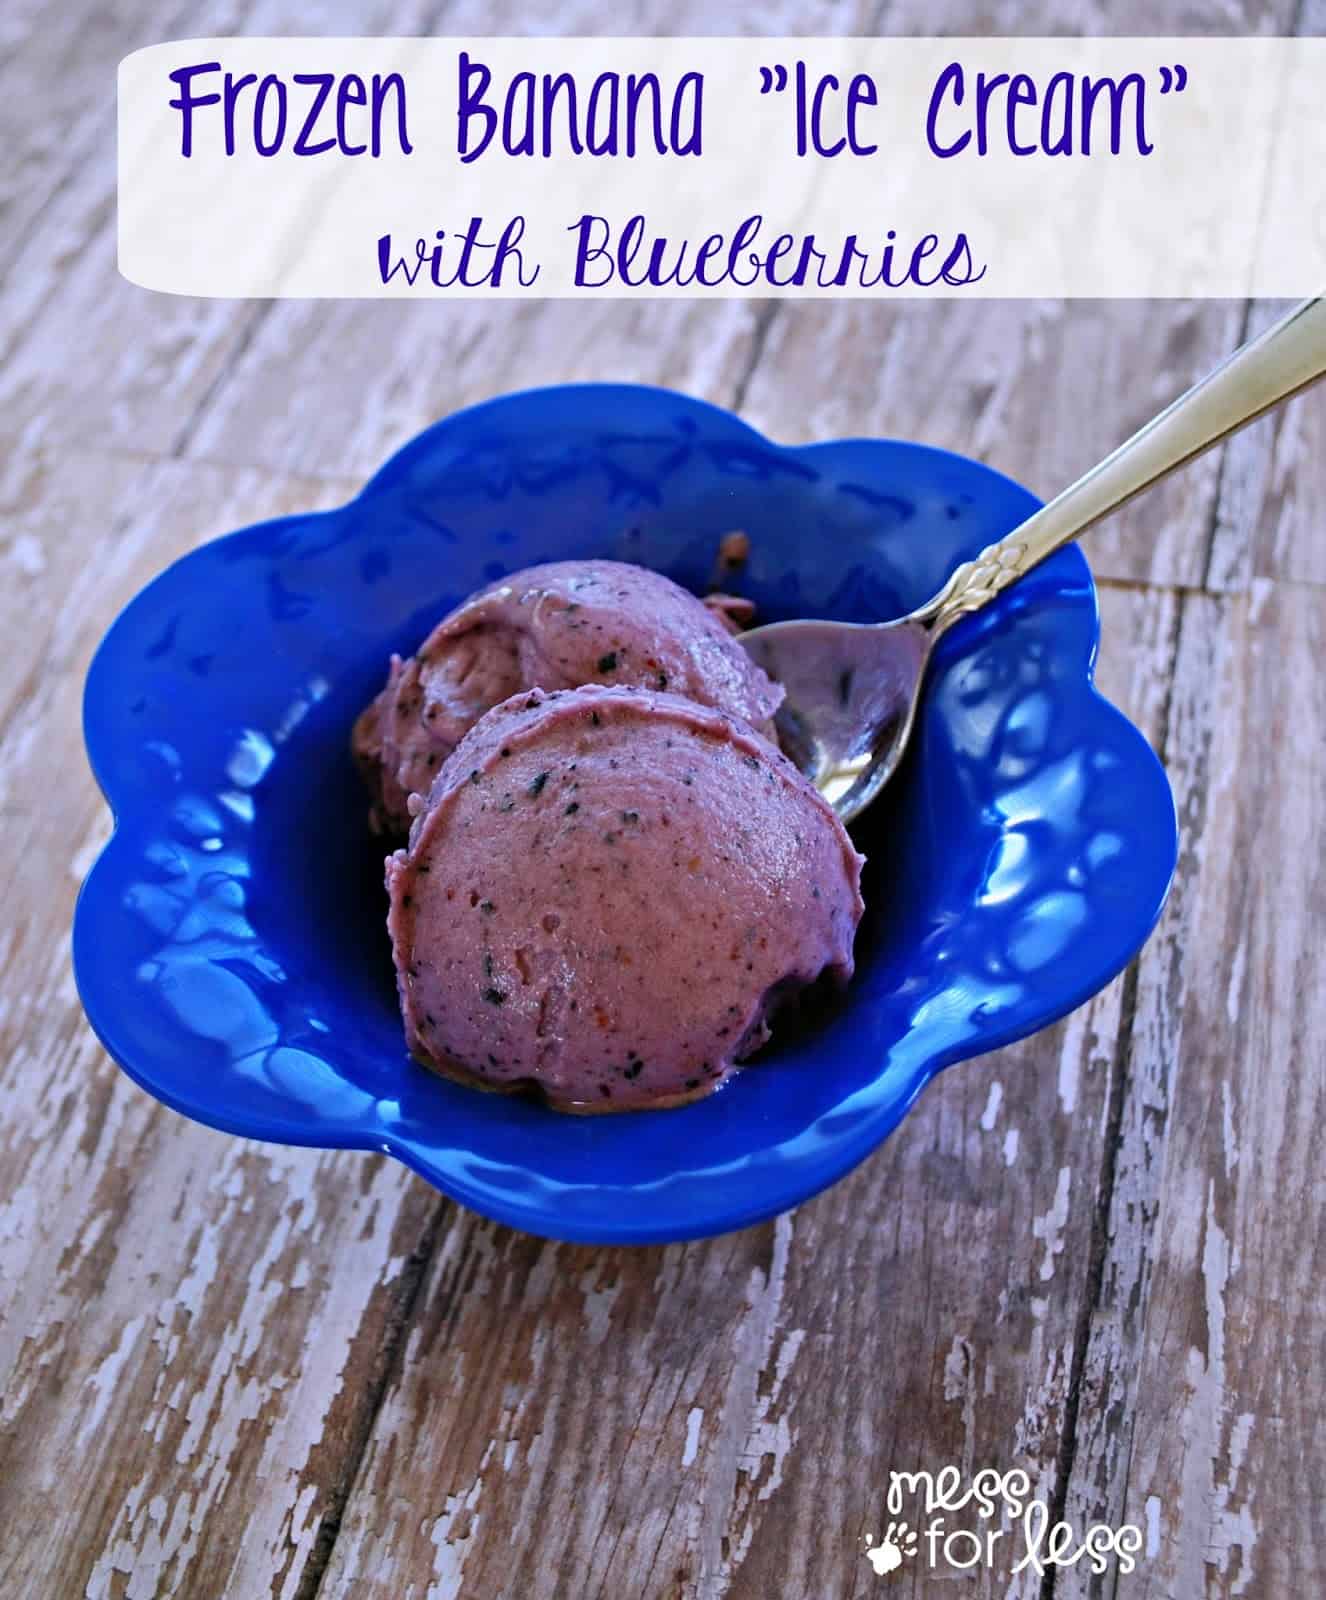 Frozen Banana Ice Cream with Blueberries - An easy kitchen hack to make use of those ripe bananas and create a sweet treat at the same time. #AD #TheHacksOfLife